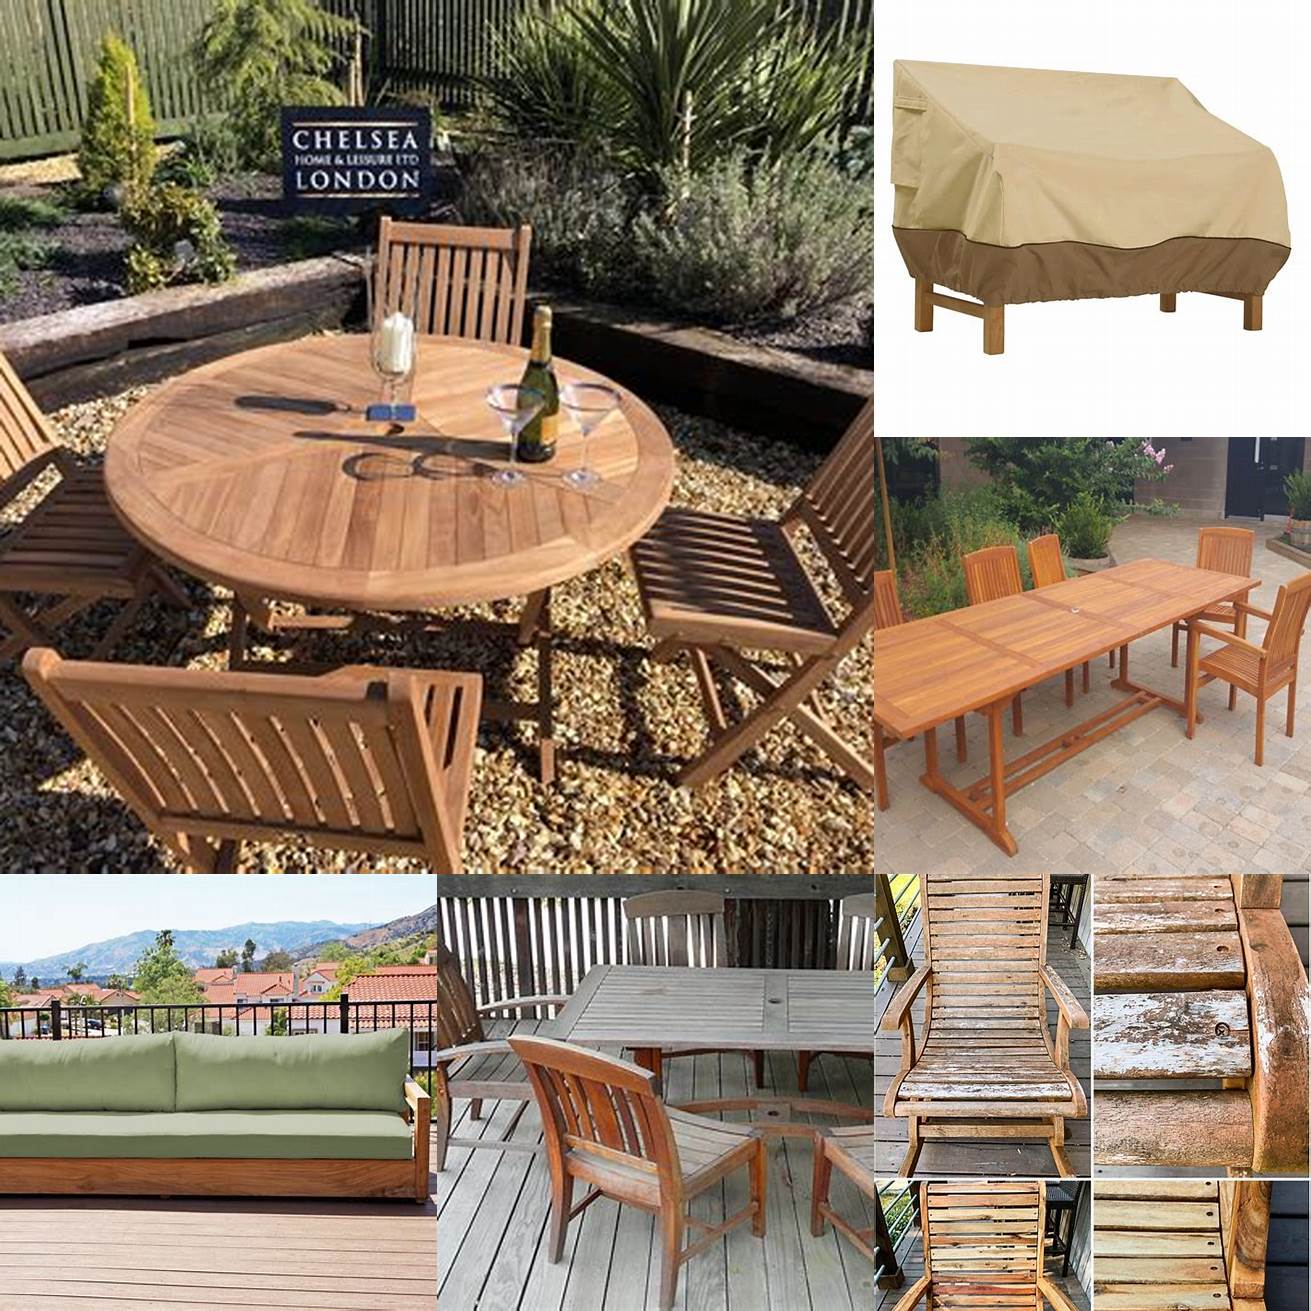 Teak furniture with cover